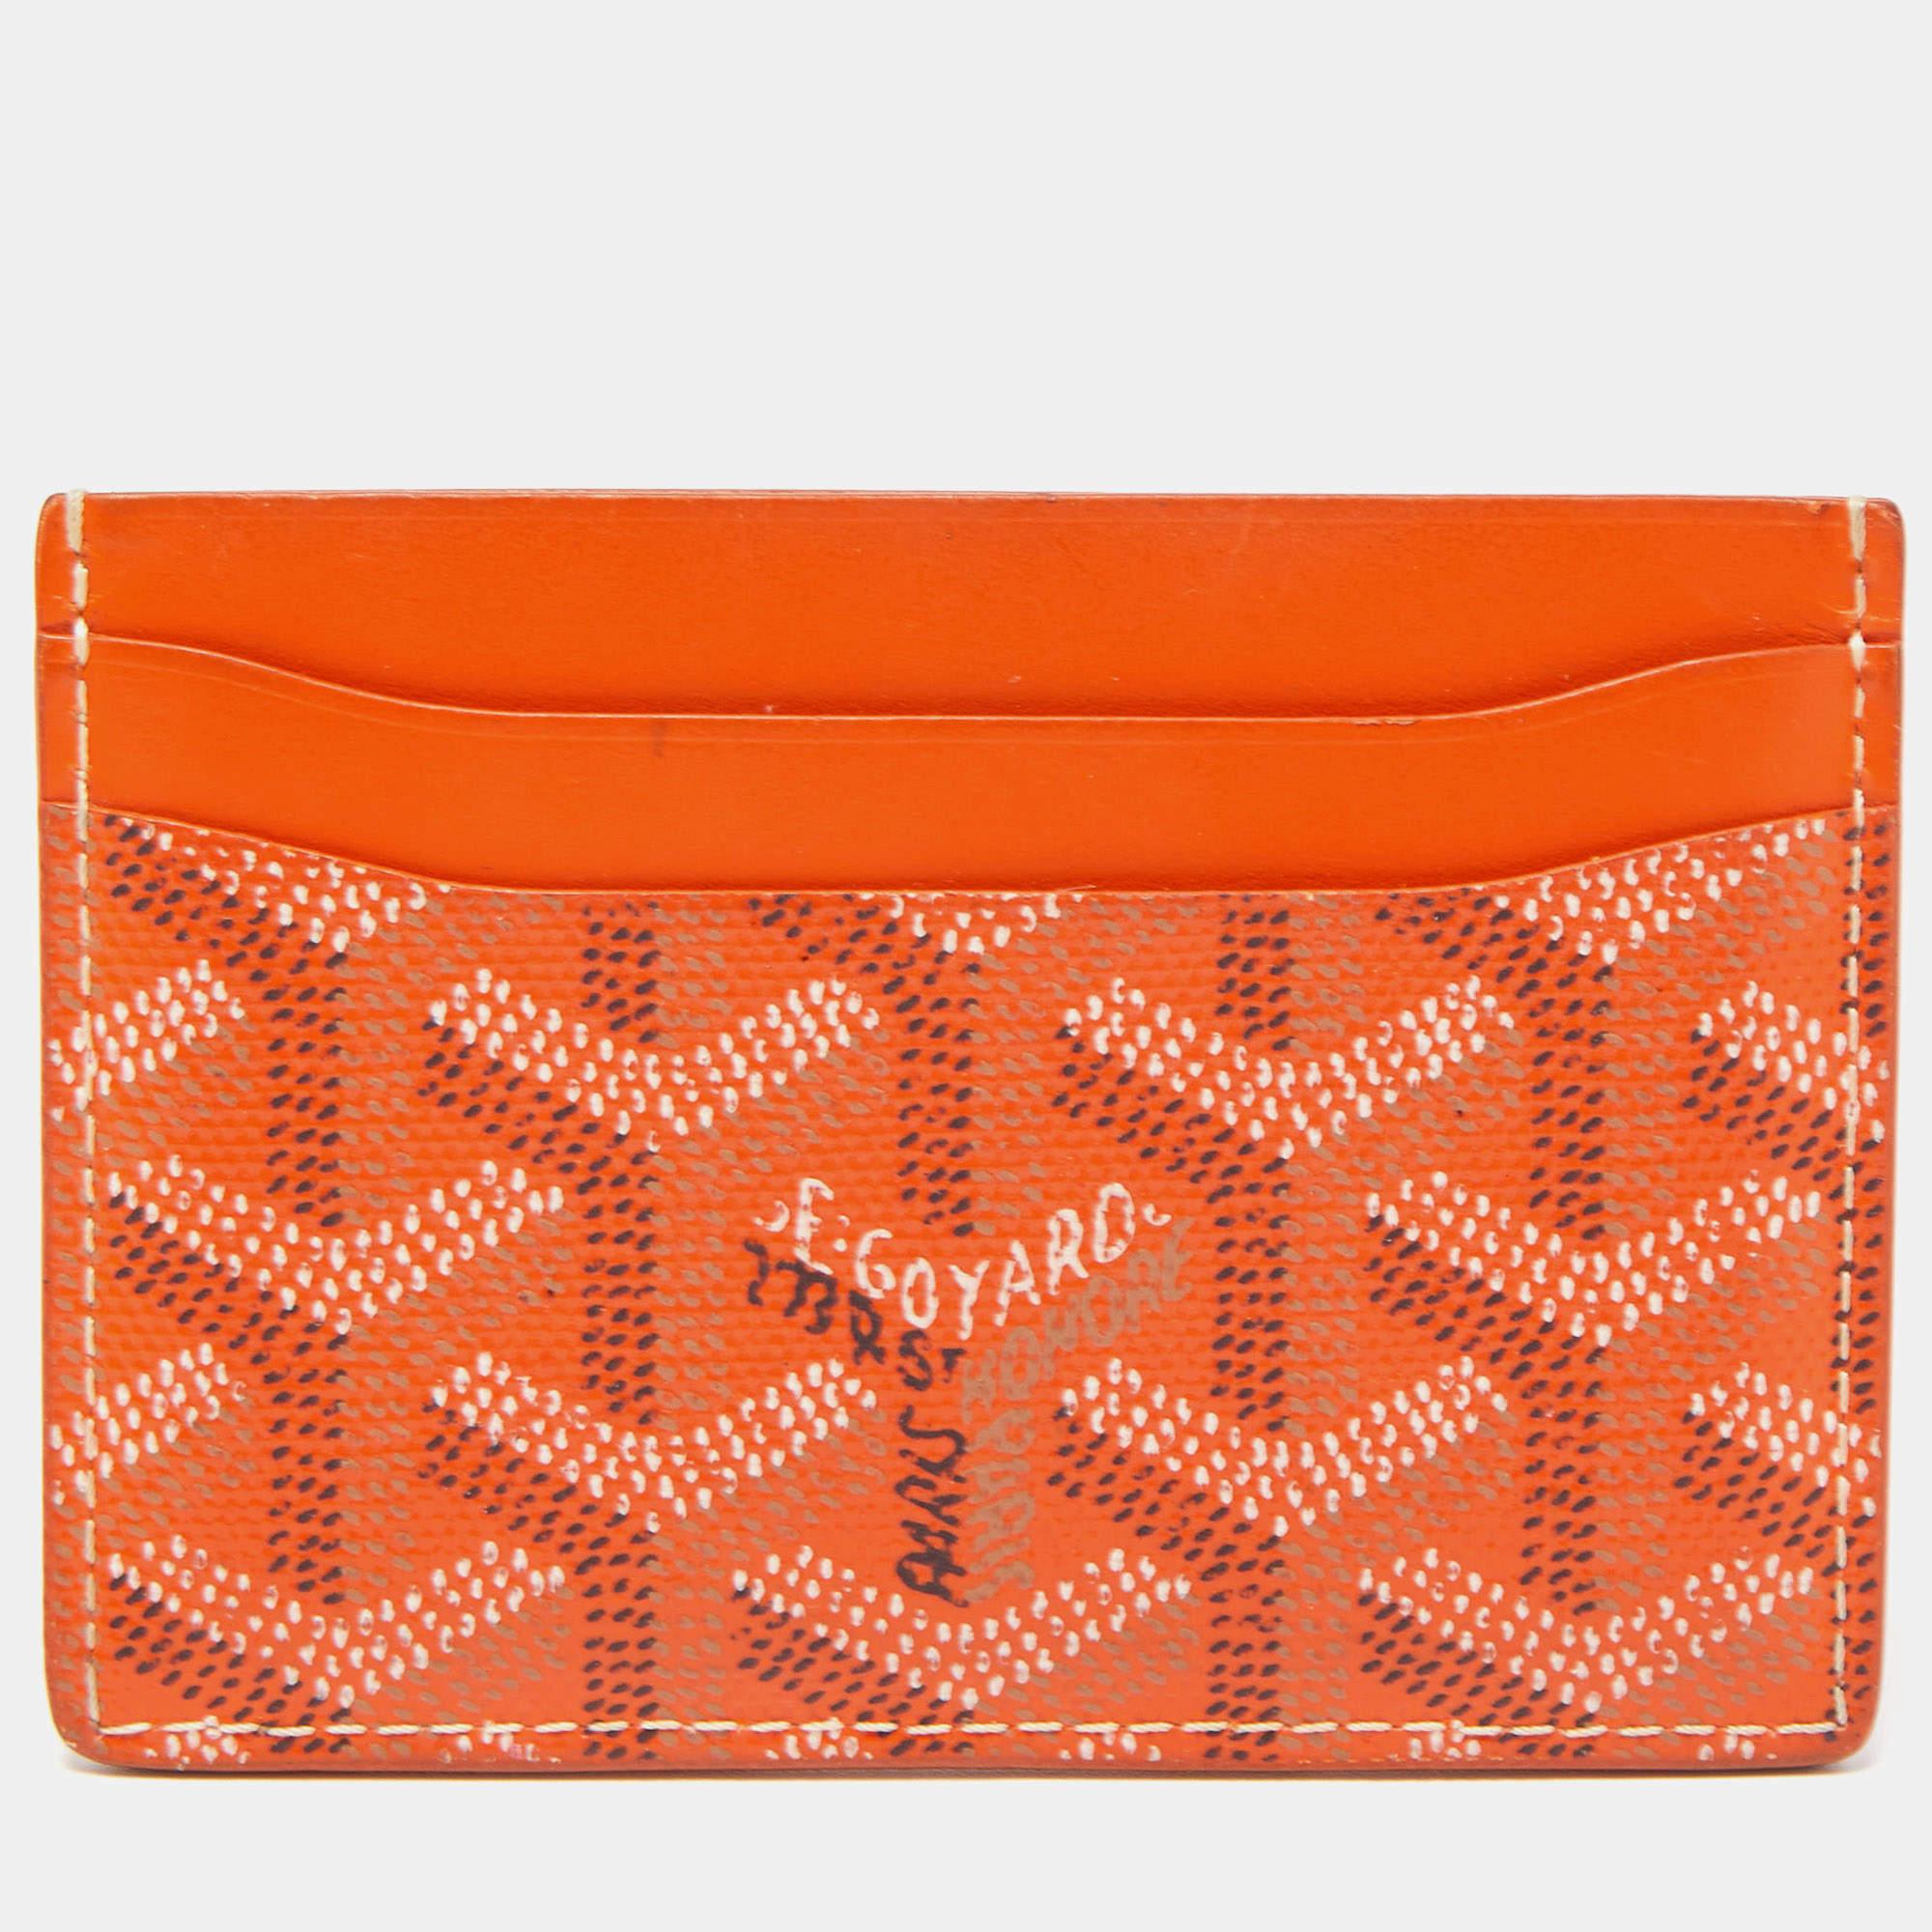 Functional and stylish, this Saint Sulpice cardholder from Goyard is your next best buy. Crafted from the signature Goyardine coated canvas, this orange card holder features card slots and leather lining on the insides. It is sleek and can be